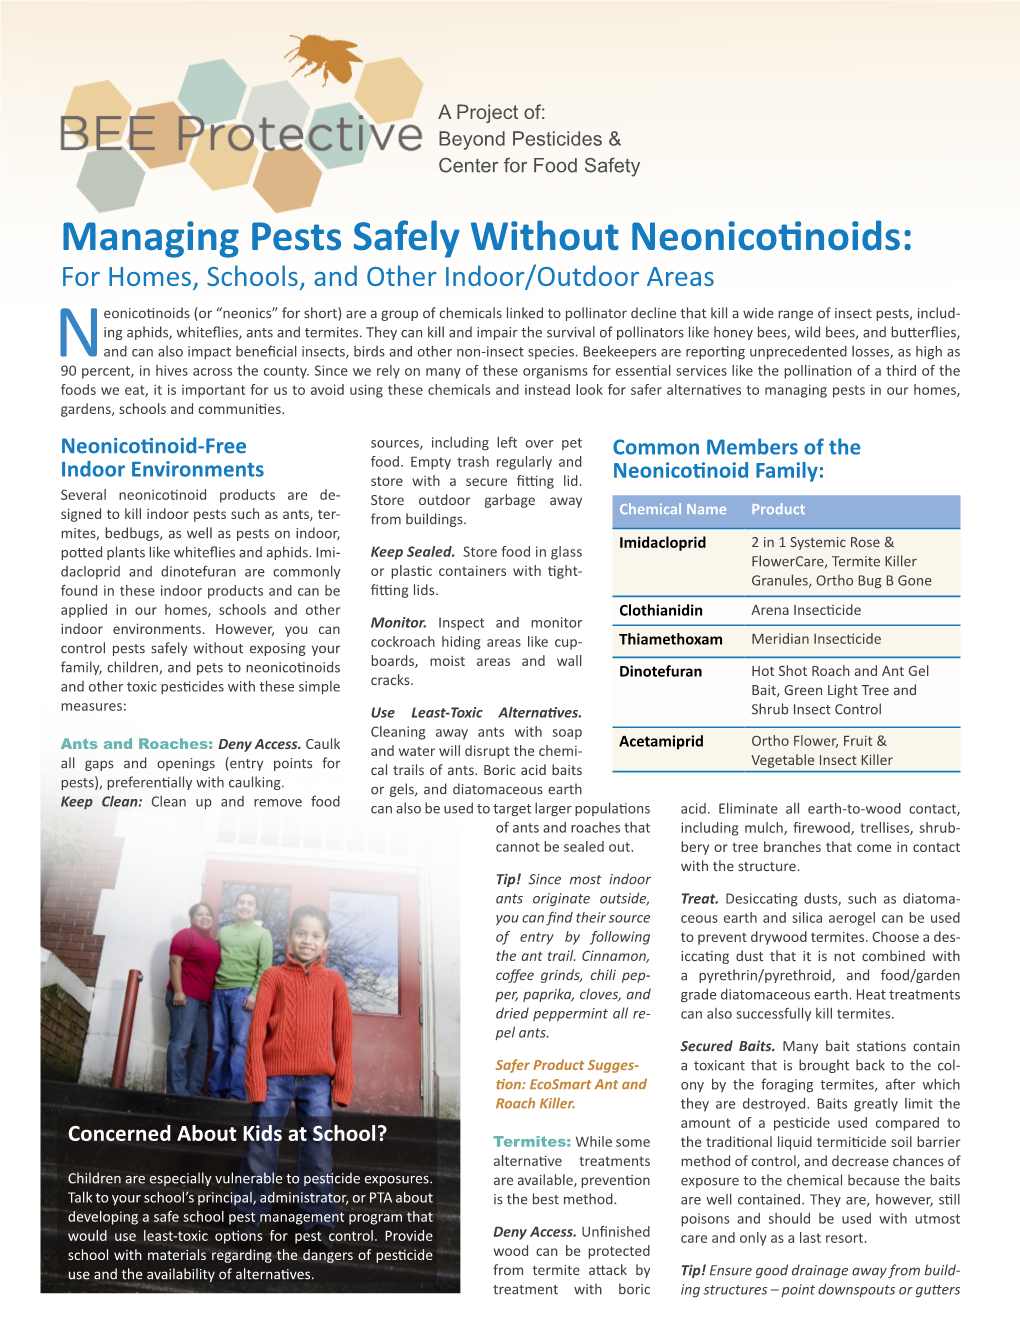 Managing Pests Safely Without Neonicotinoids